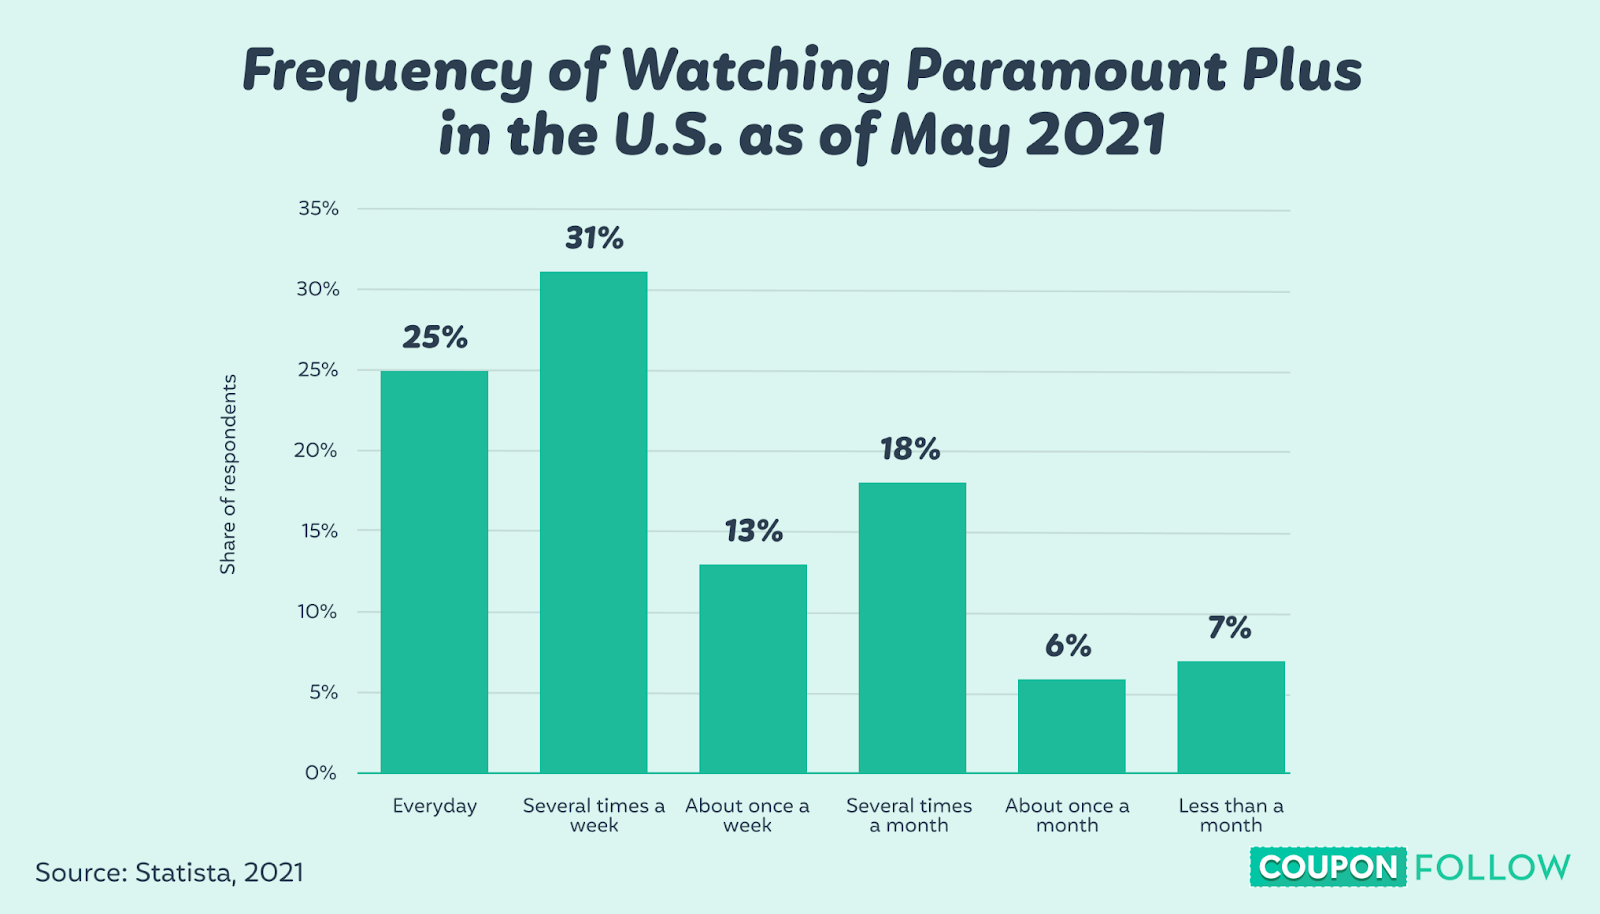 image showing the frequency at which people in the U.S. watch paramount plus